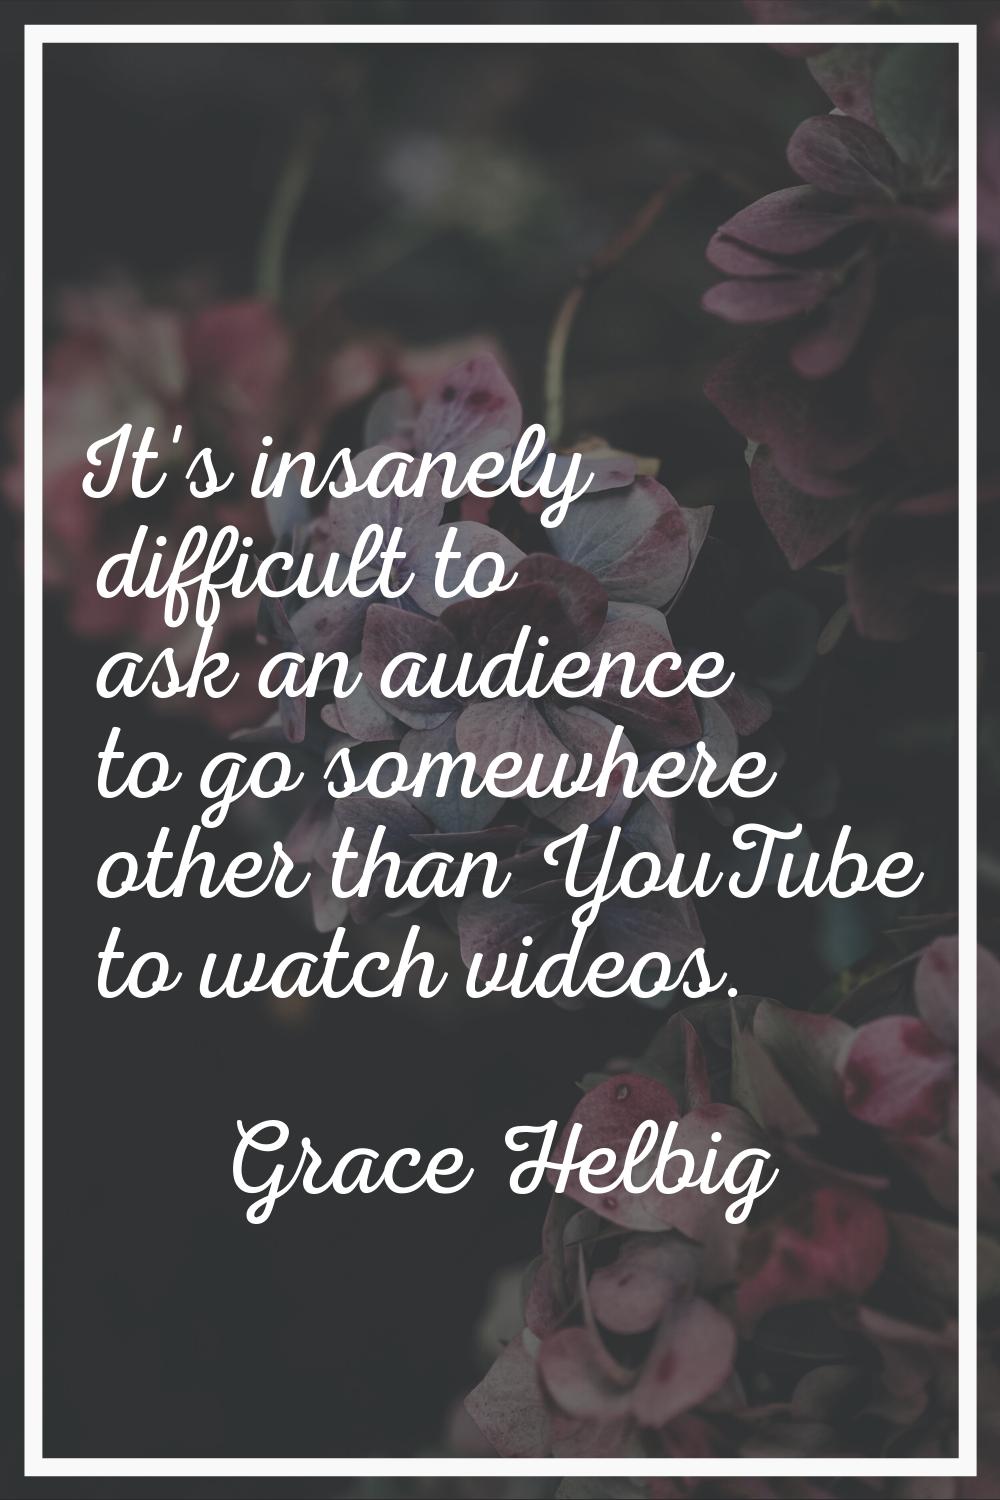 It's insanely difficult to ask an audience to go somewhere other than YouTube to watch videos.